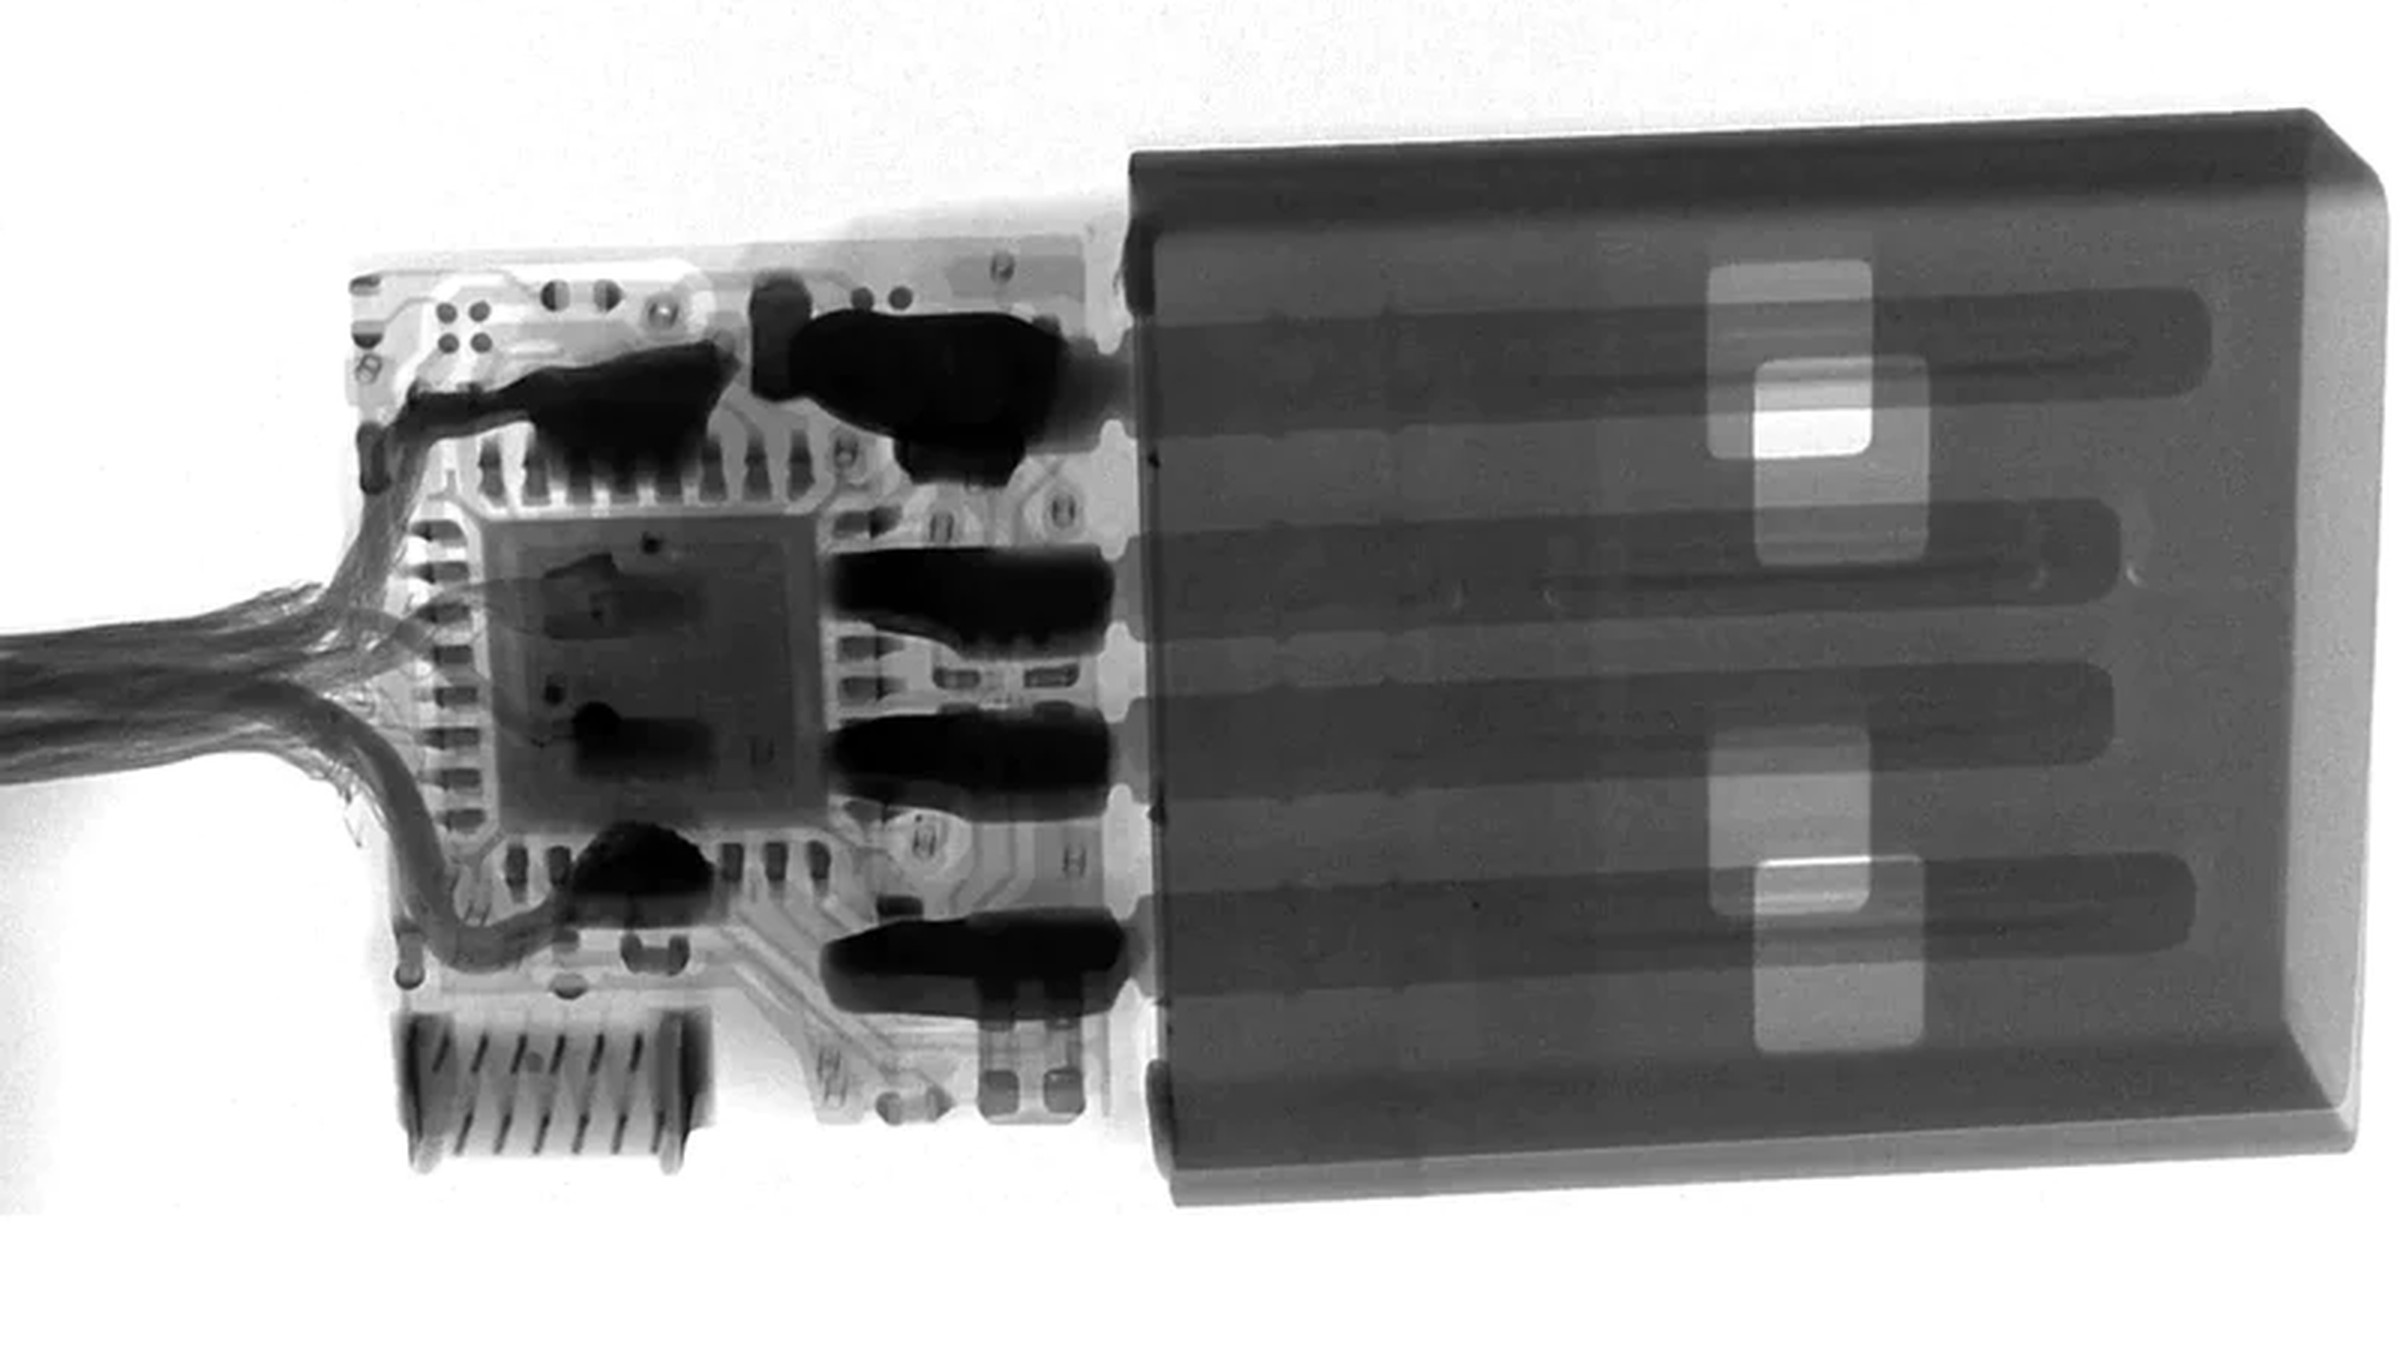 An X-ray of the O.MG Cable showing the chip implant.